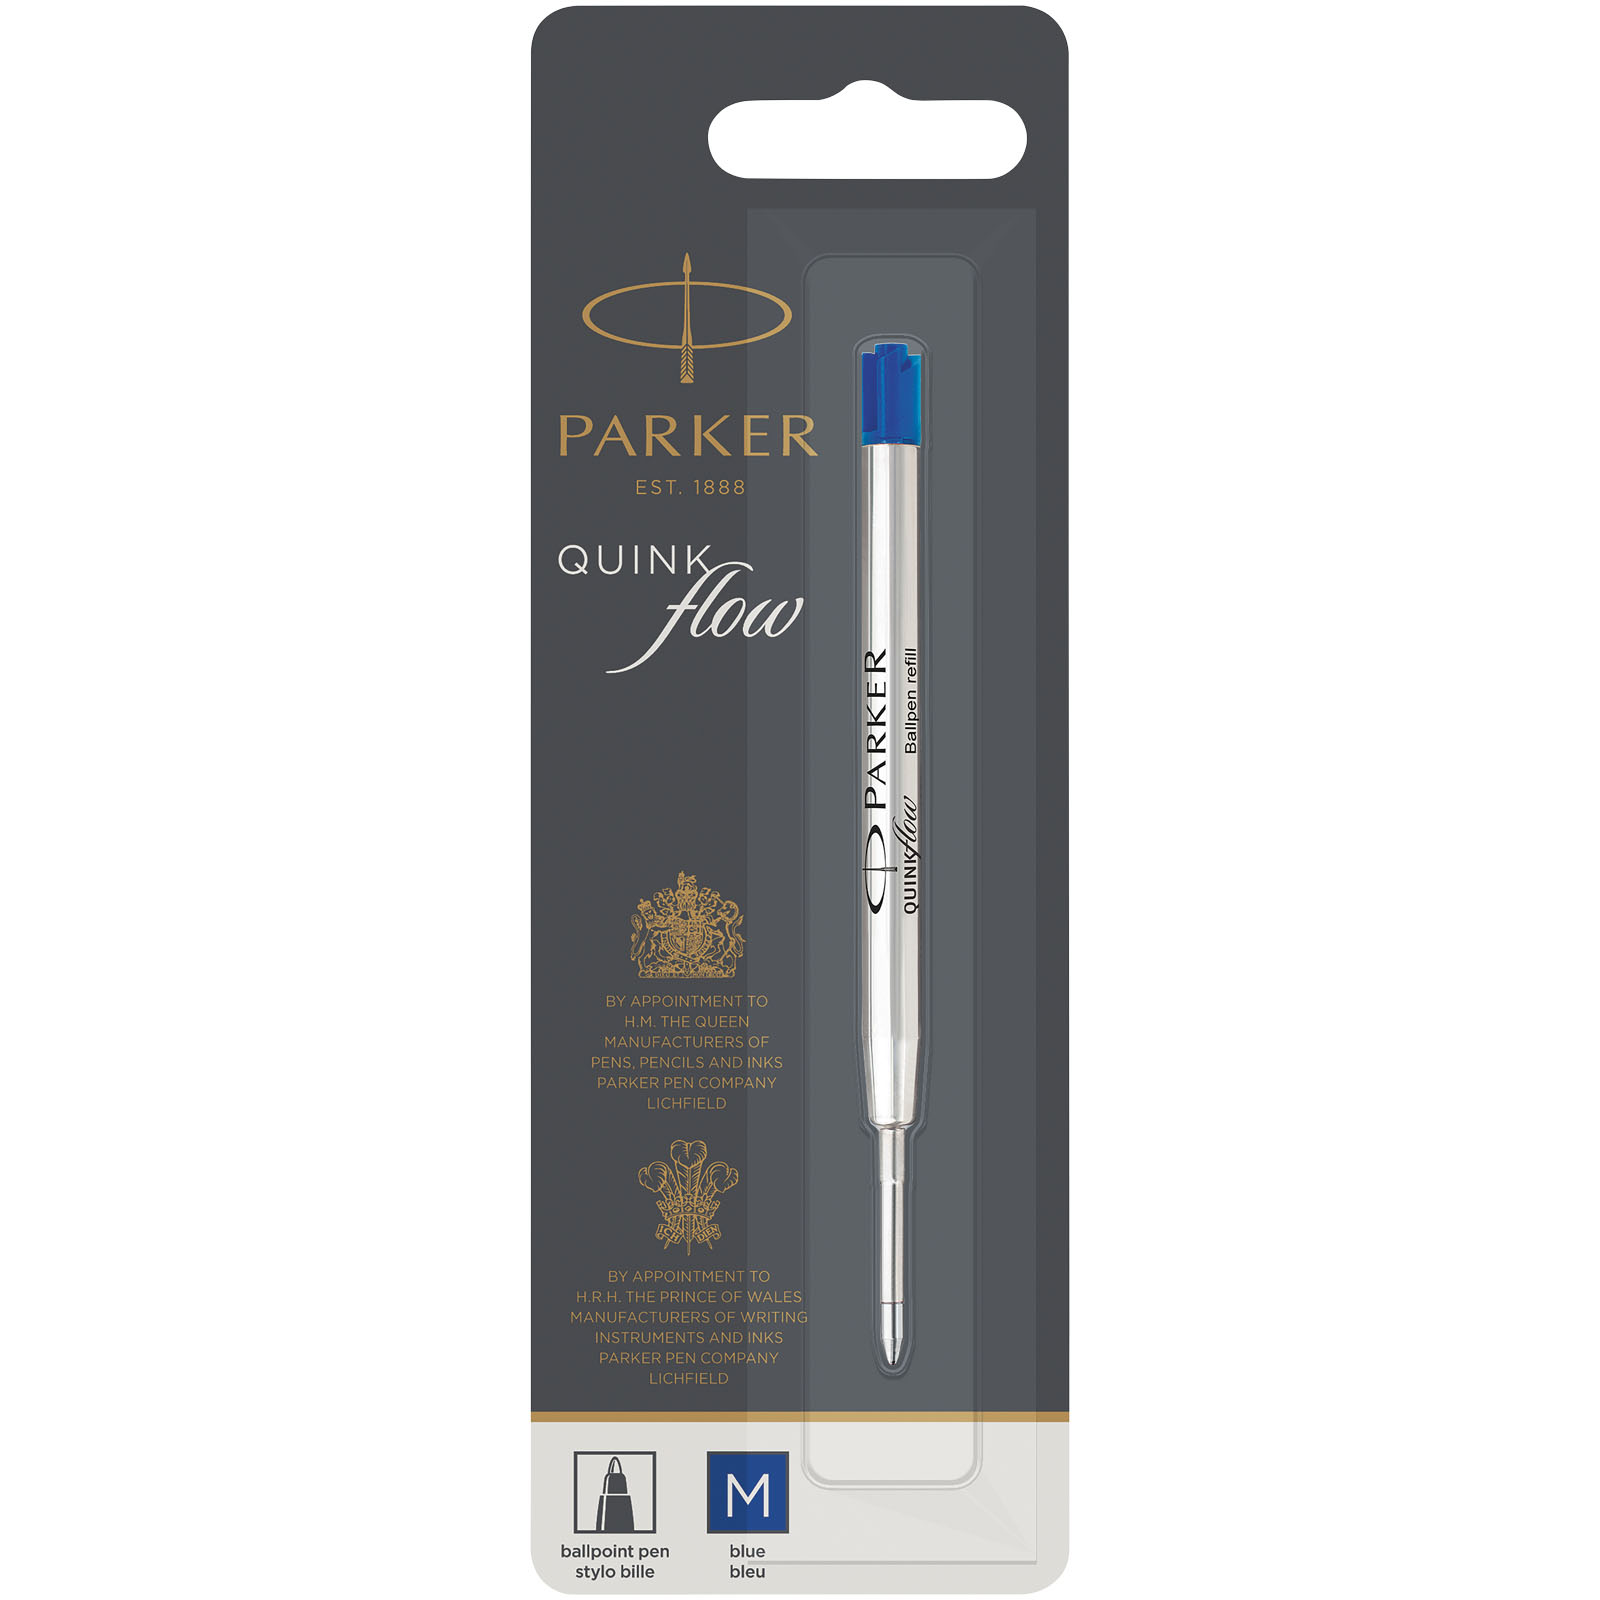 Advertising Other Pens & Writing Accessories - Parker Quinkflow ballpoint pen refill - 0